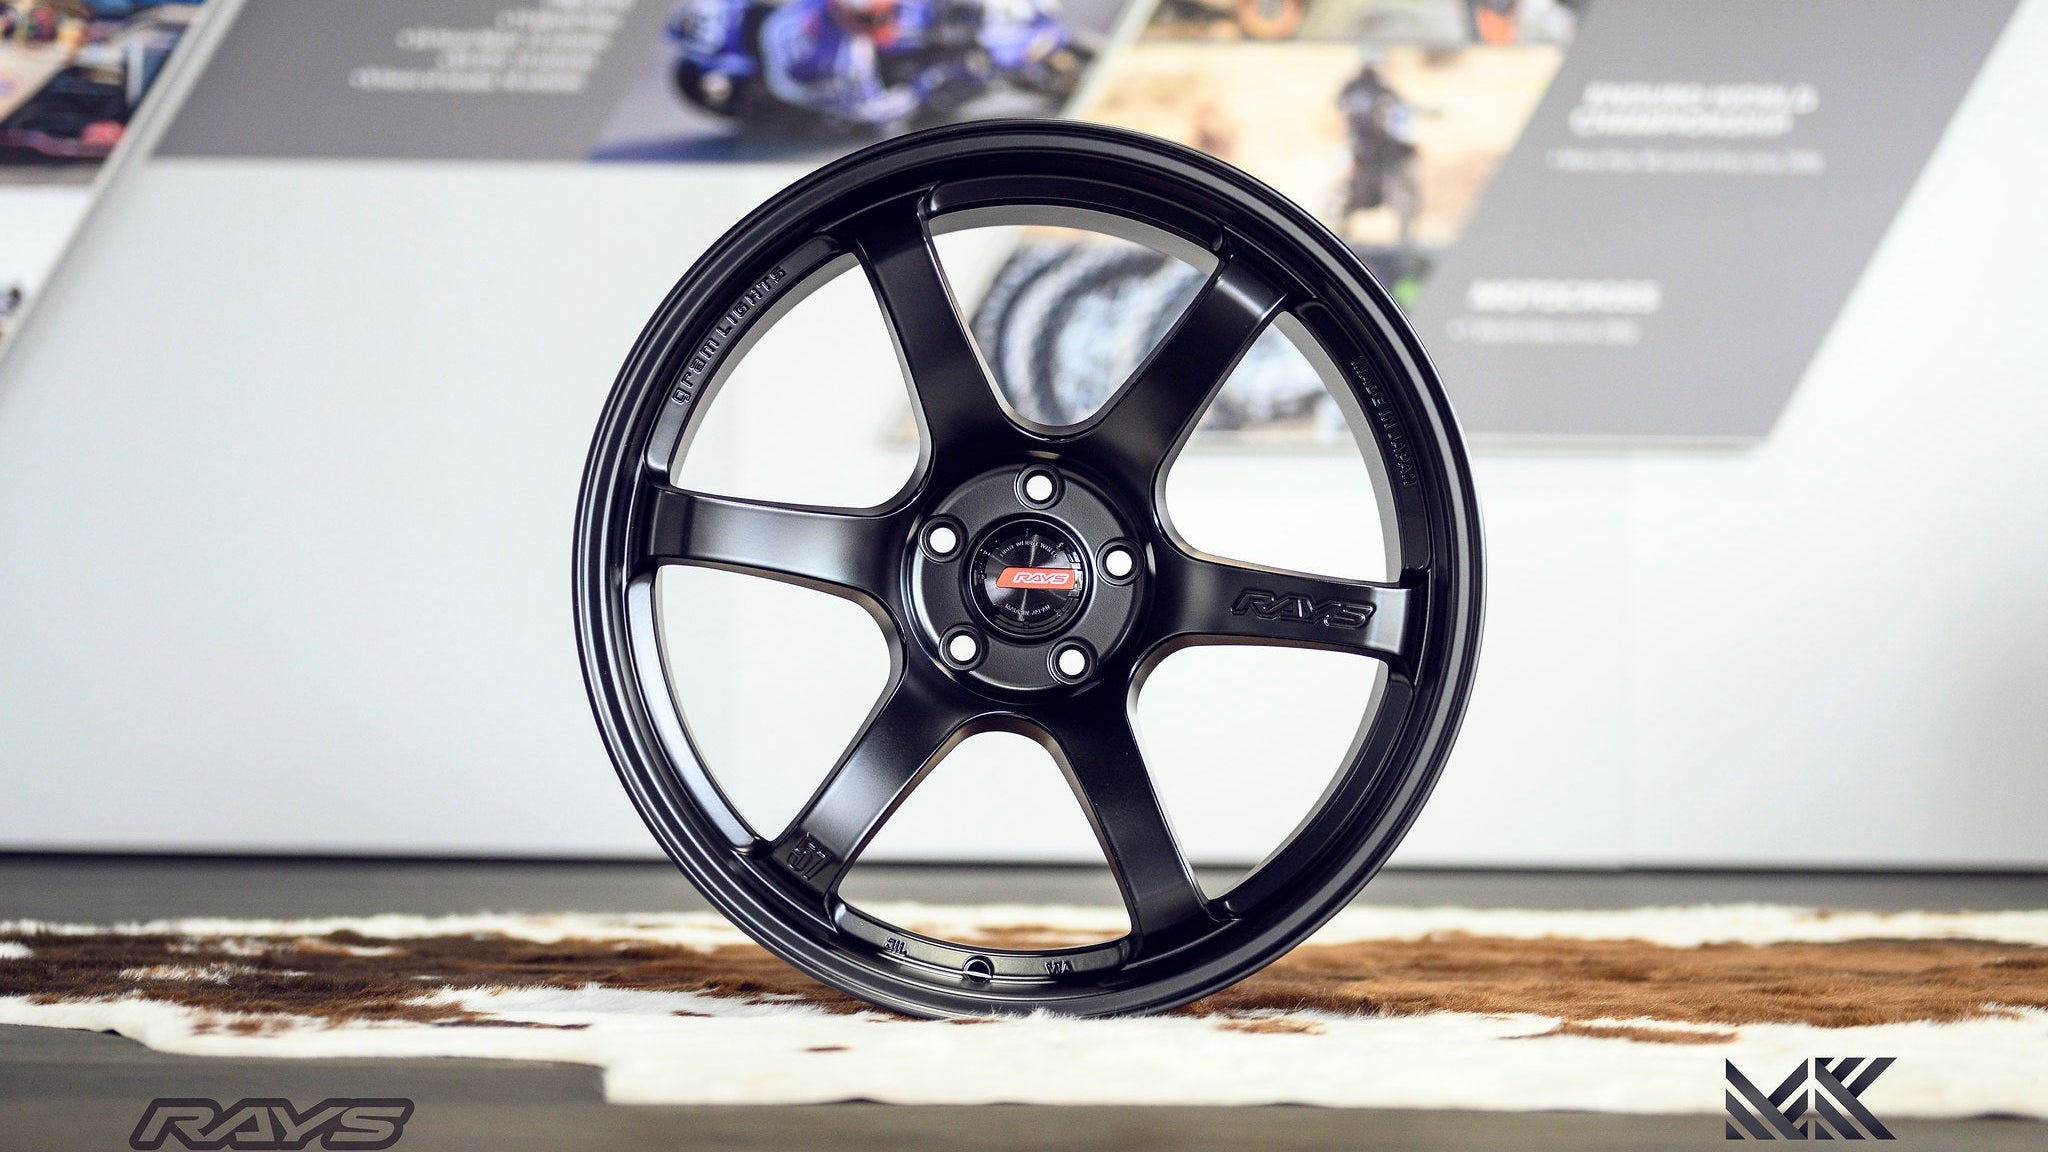 gramLIGHTS 57DR 18" Single Units - Premium Wheels from Gram Lights - From just $600.00! Shop now at MK MOTORSPORTS